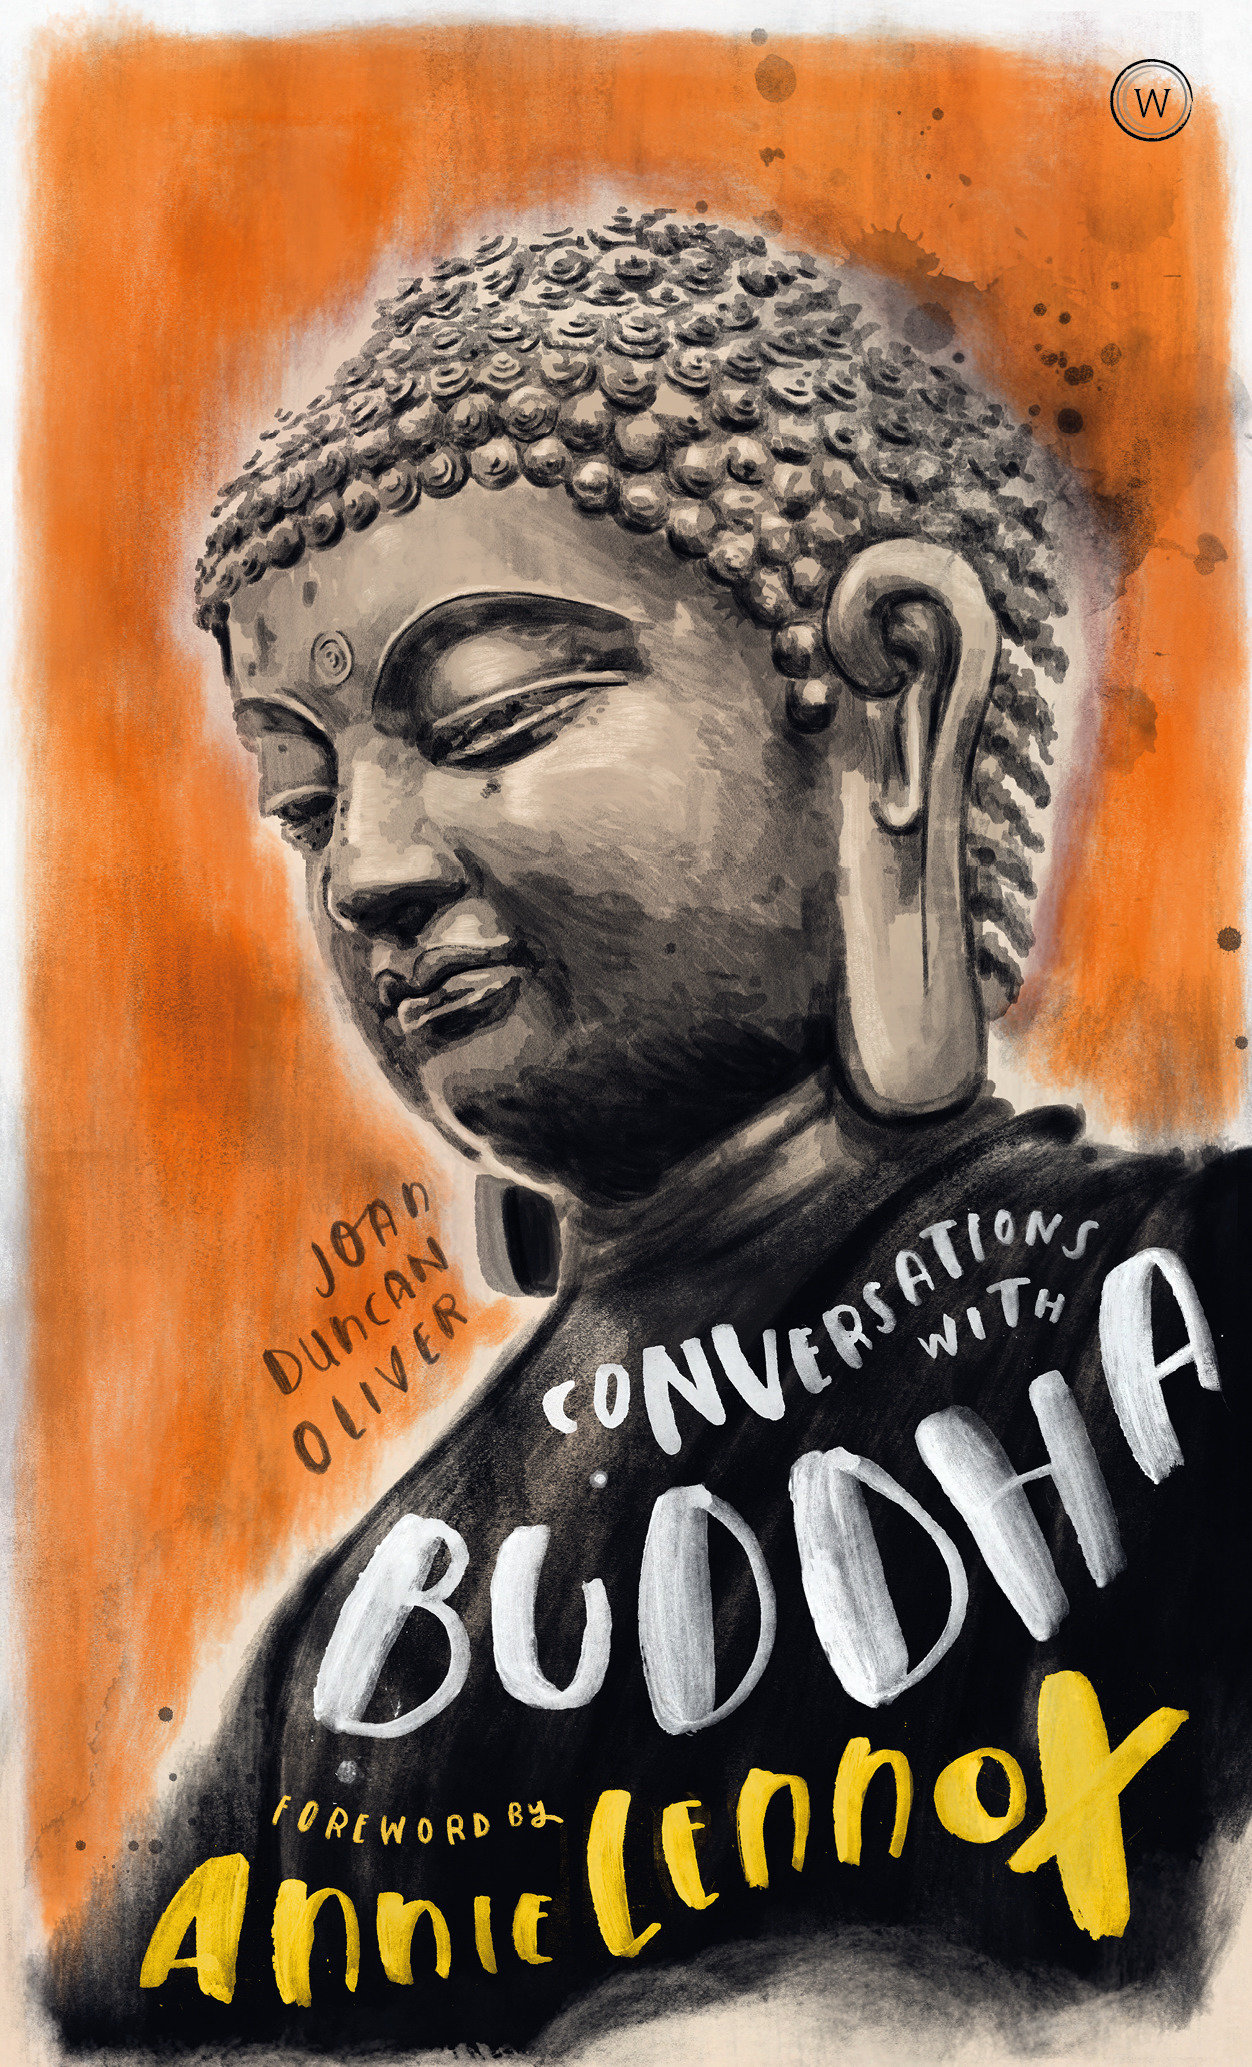 Conversations With Buddha (Hardcover Book)